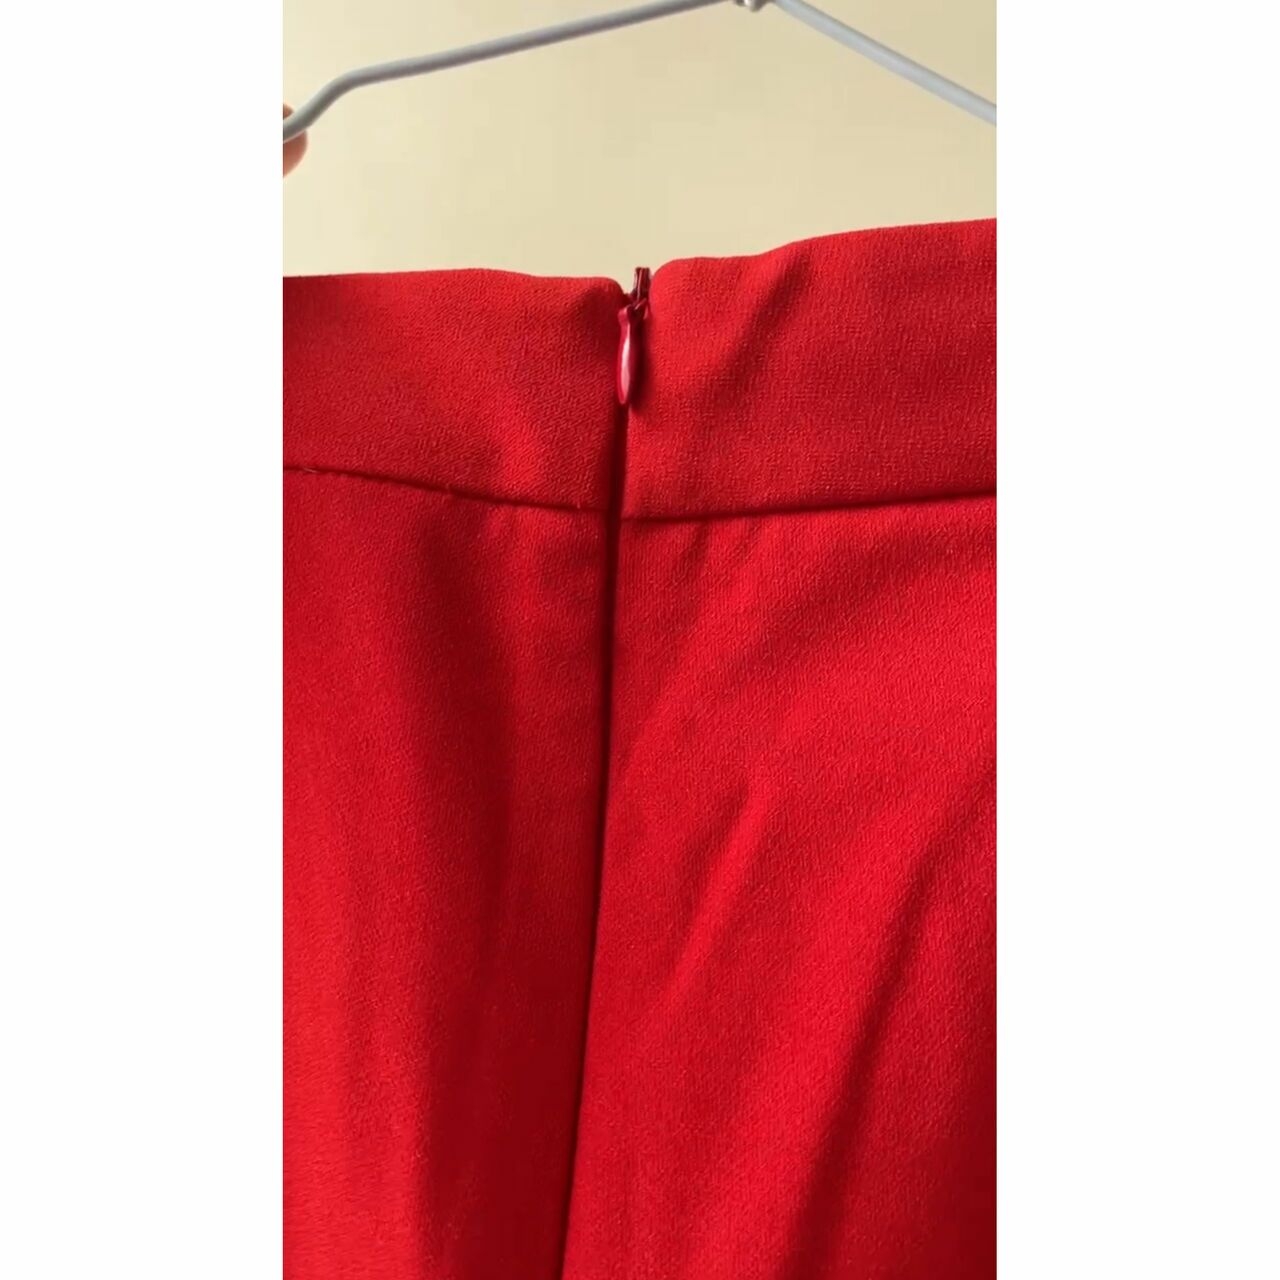 Mds Red Cropped Pants